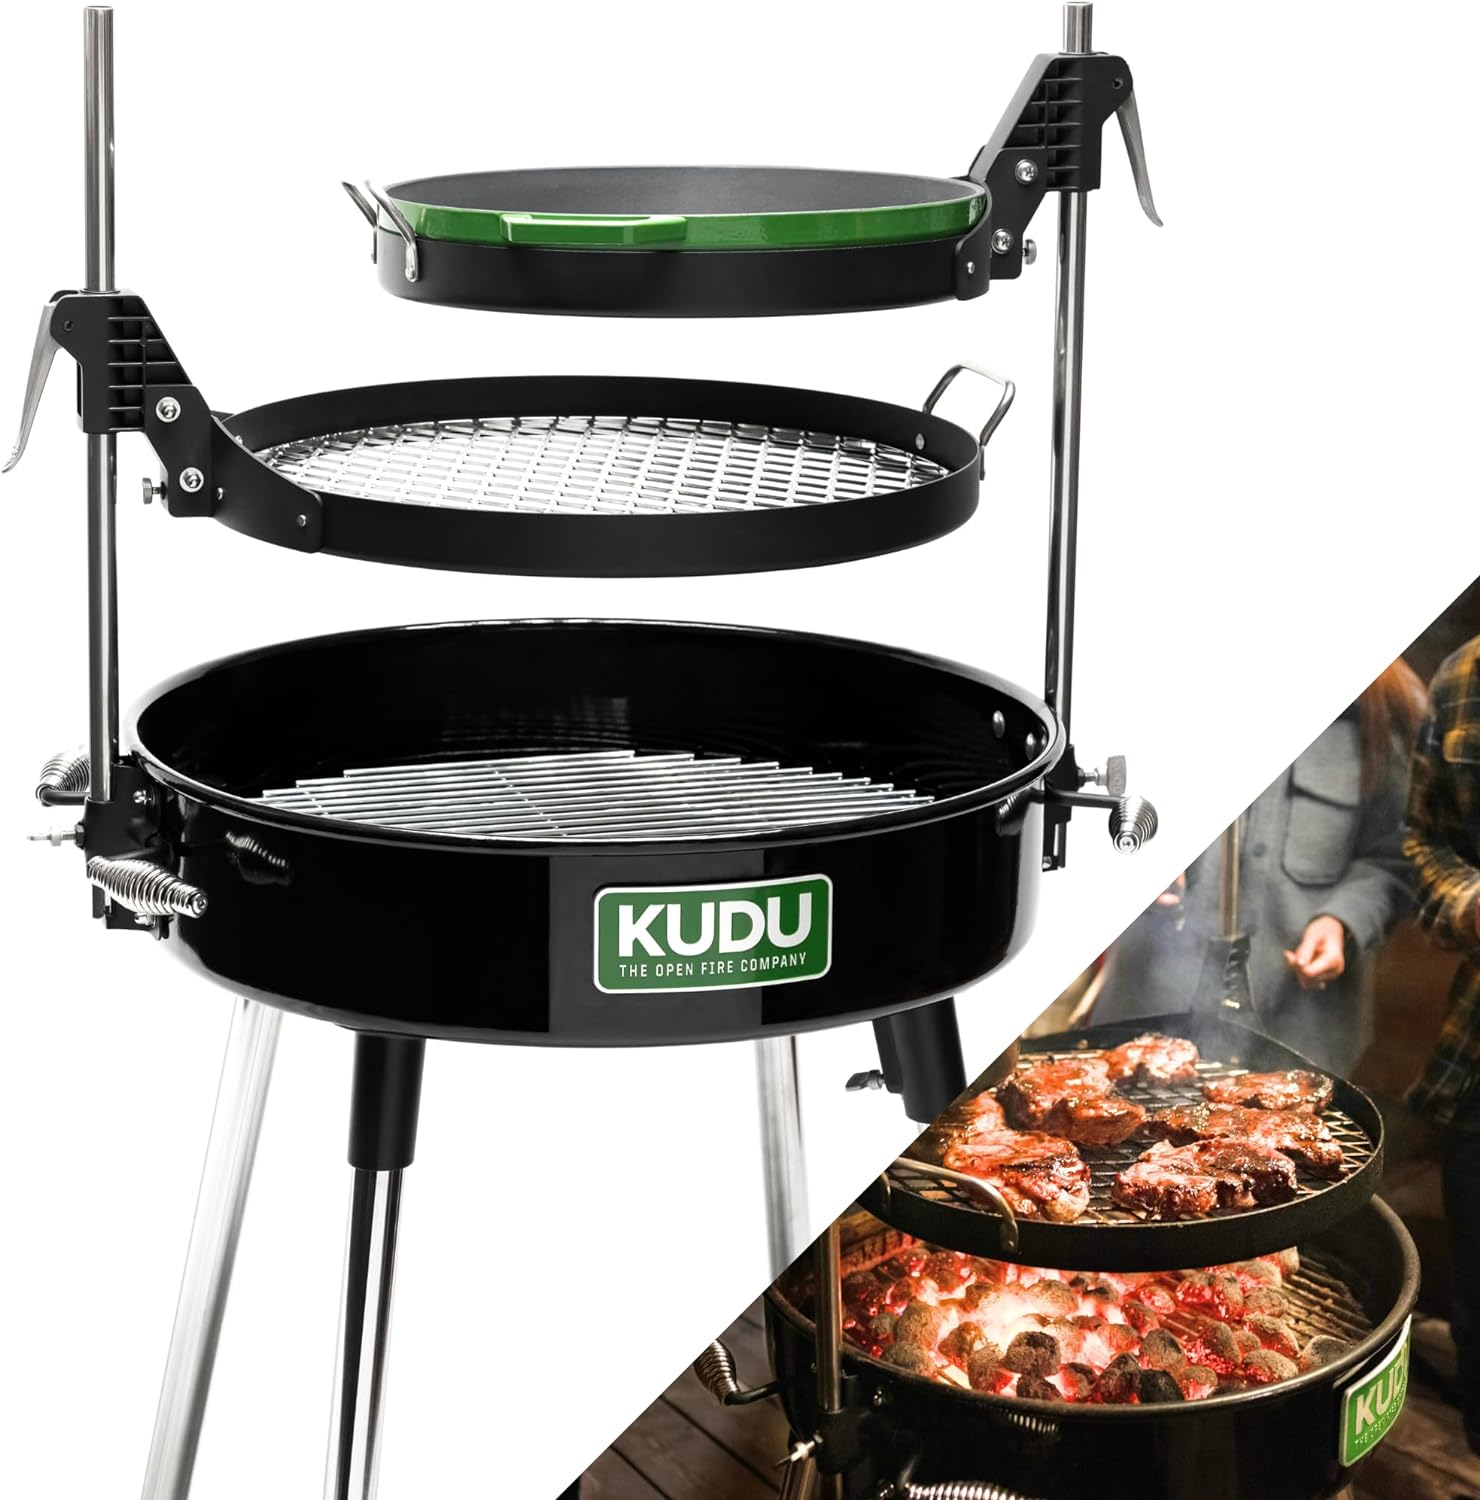 KUDU 3 Grill - Open Fire BBQ Grilling System, Portable Charcoal Grills